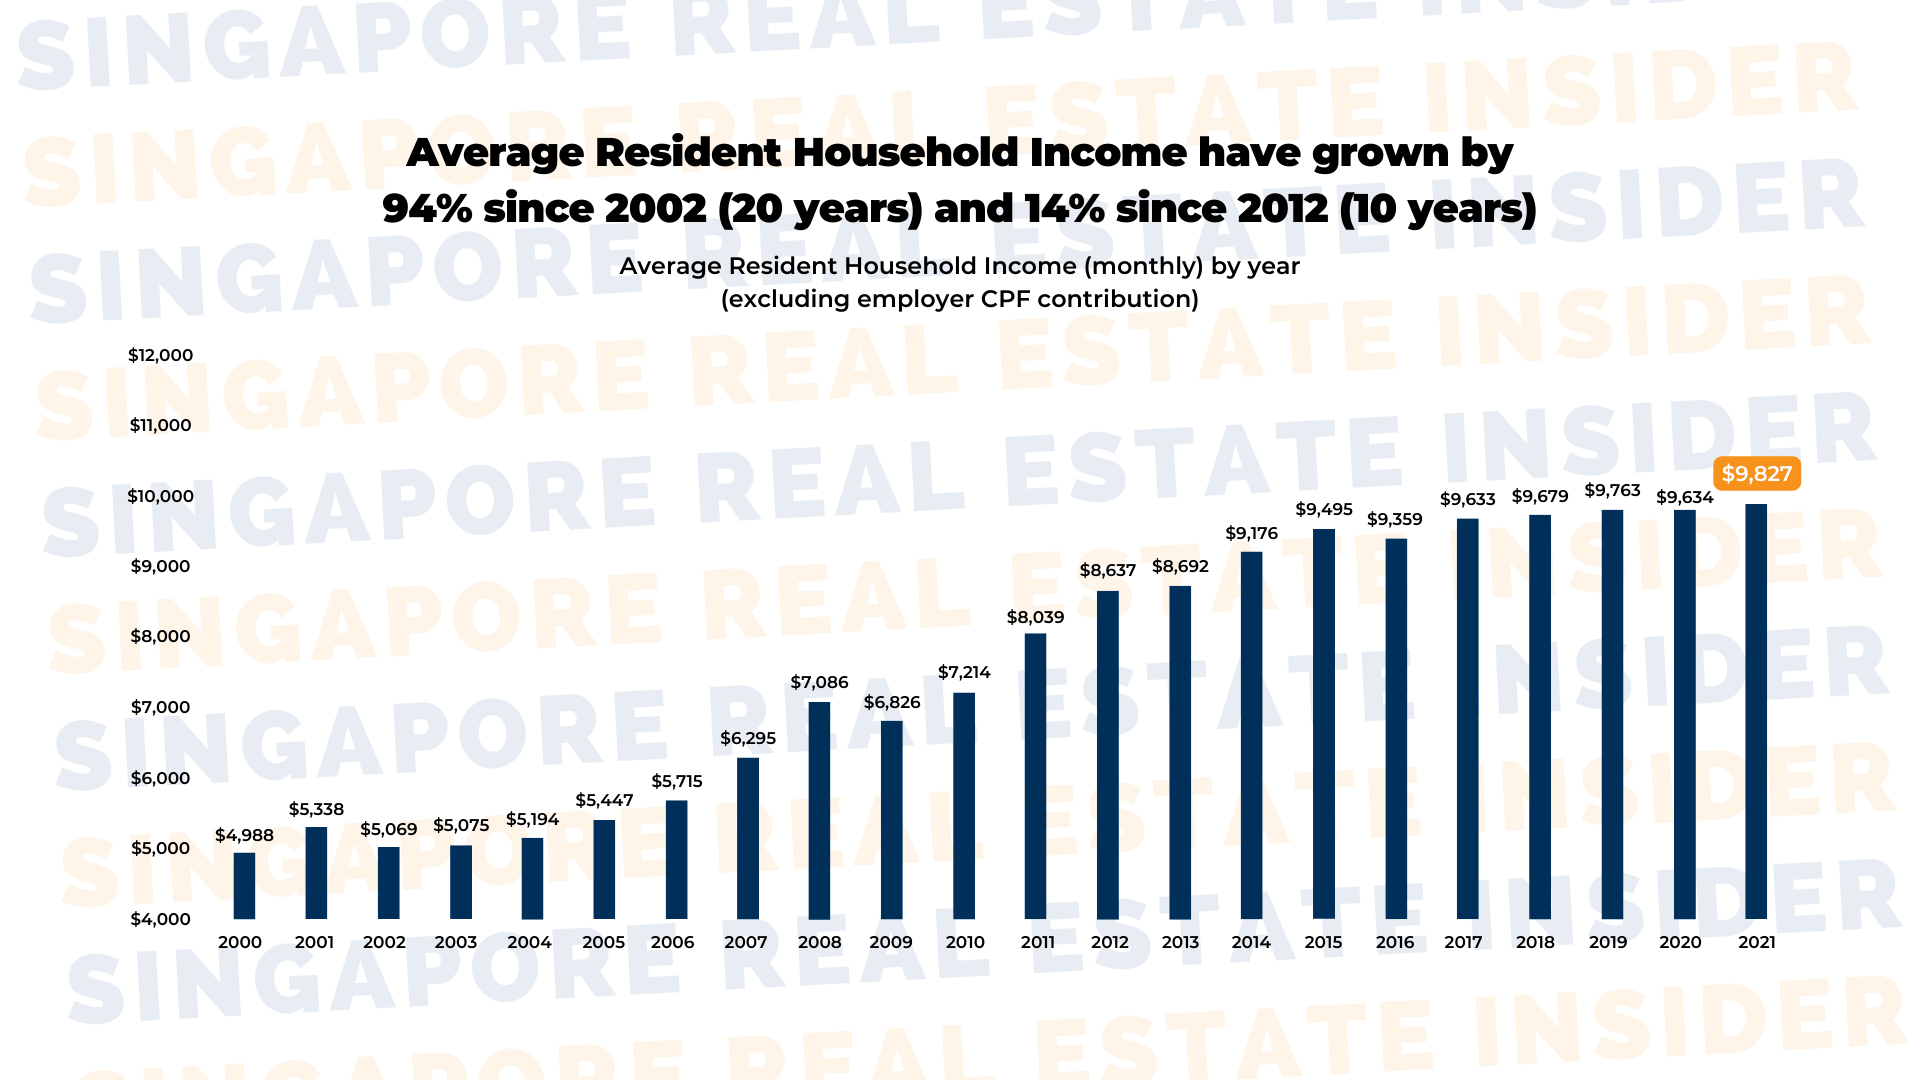 Average Resident Household Income